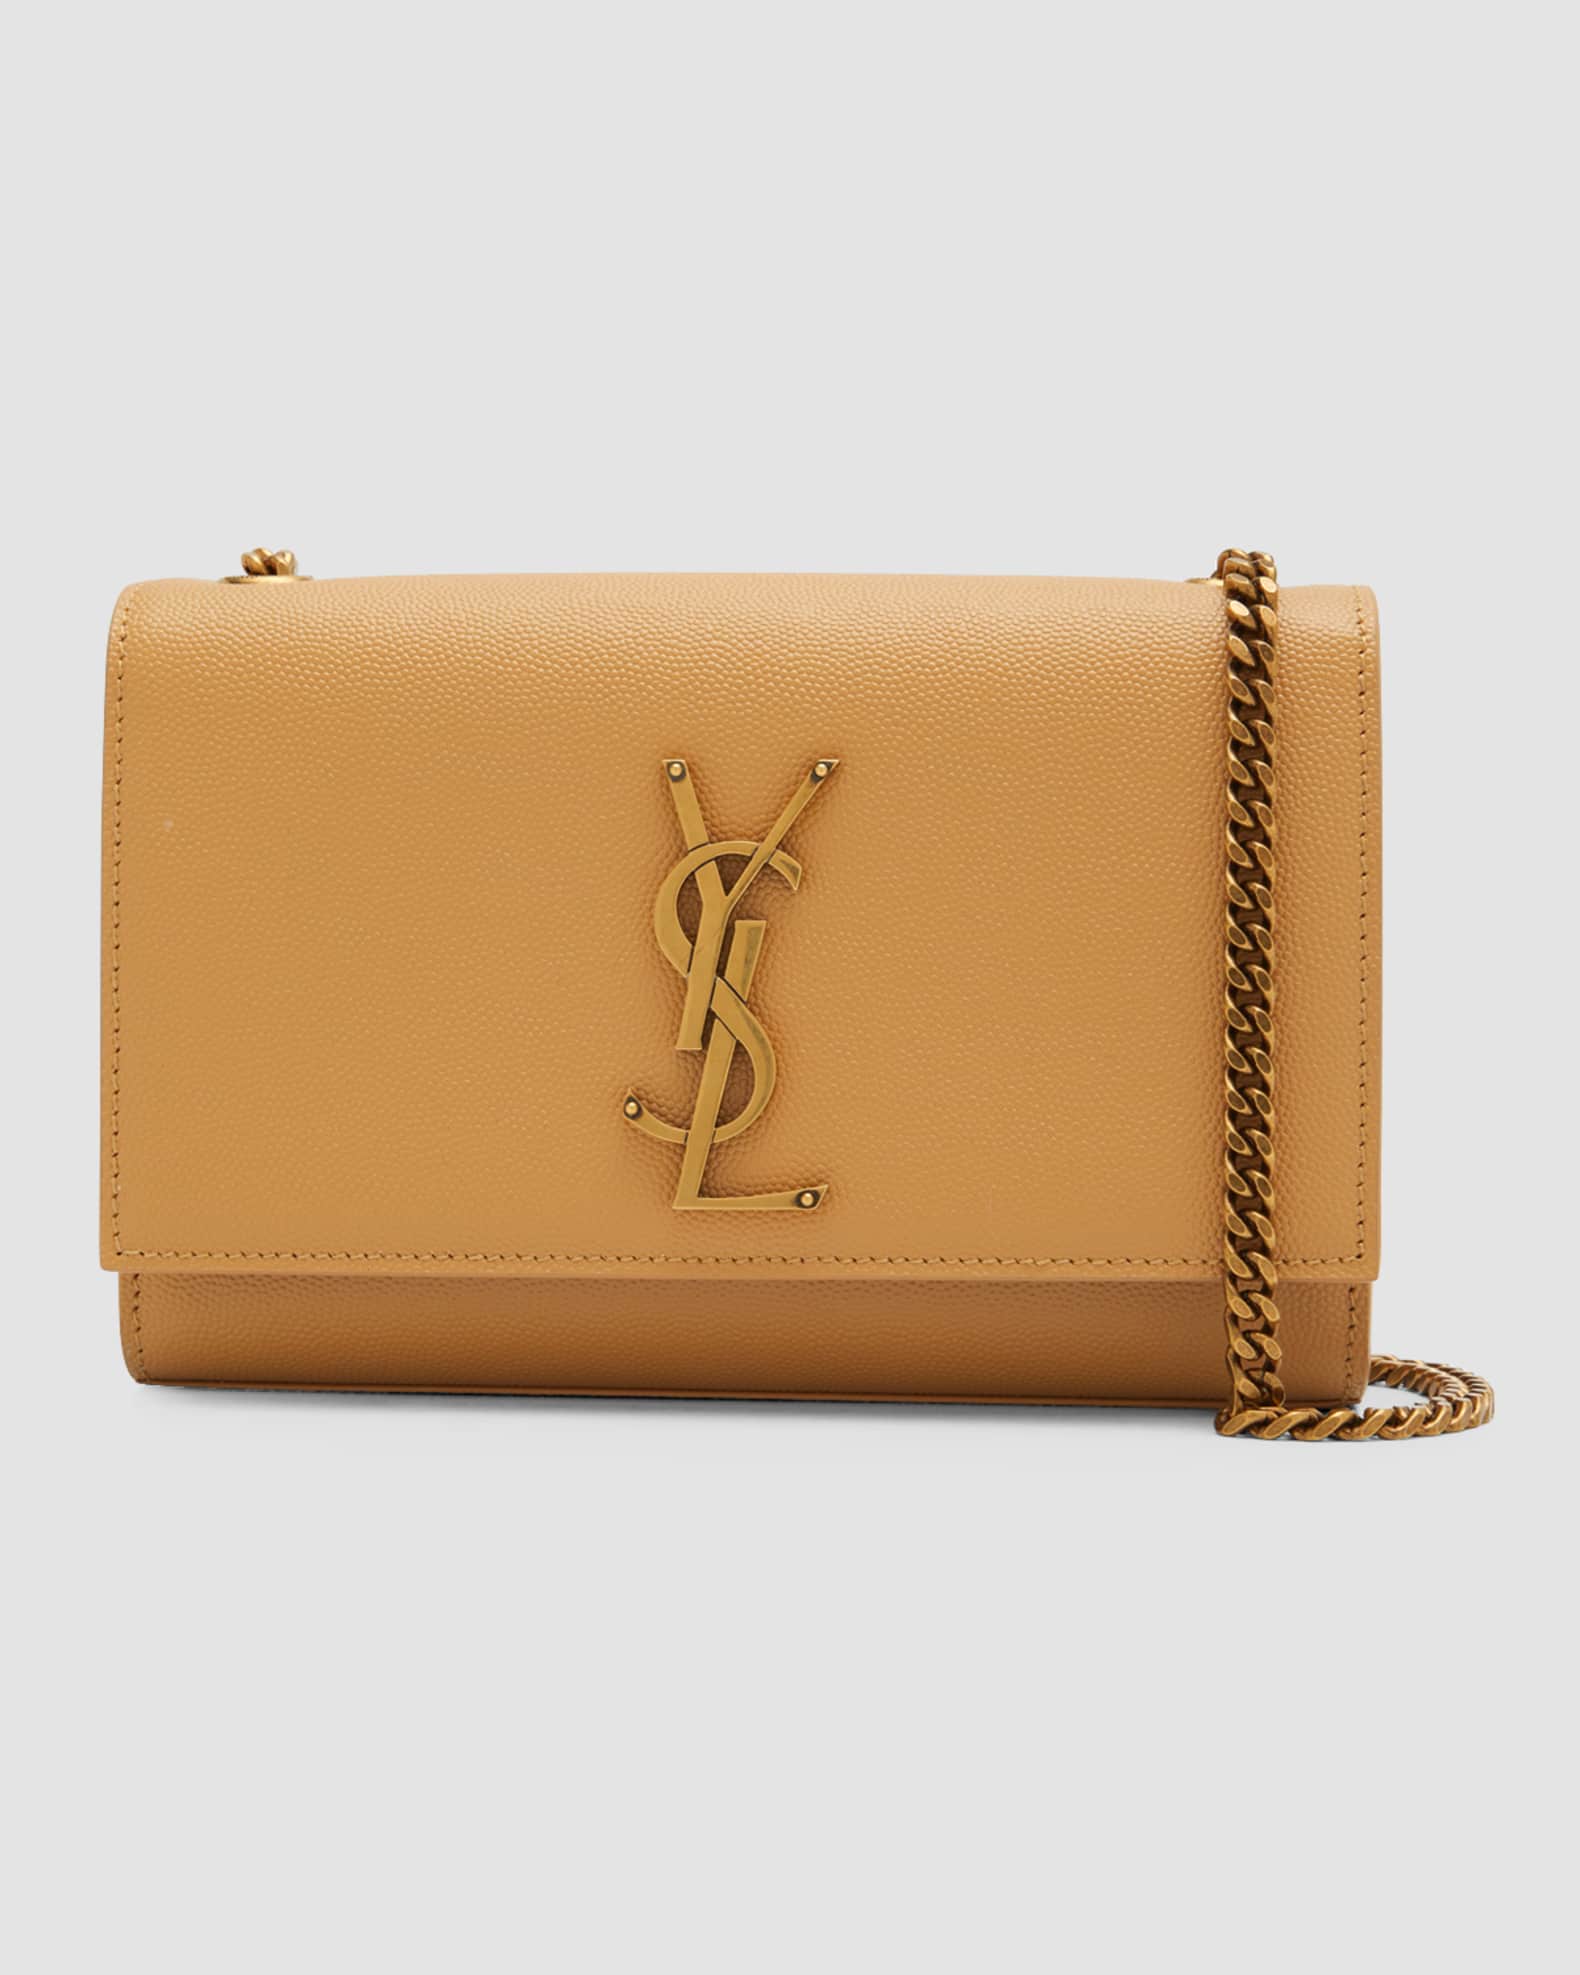 Saint Laurent Kate Small YSL Crossbody Bag in Grained Leather | Neiman ...